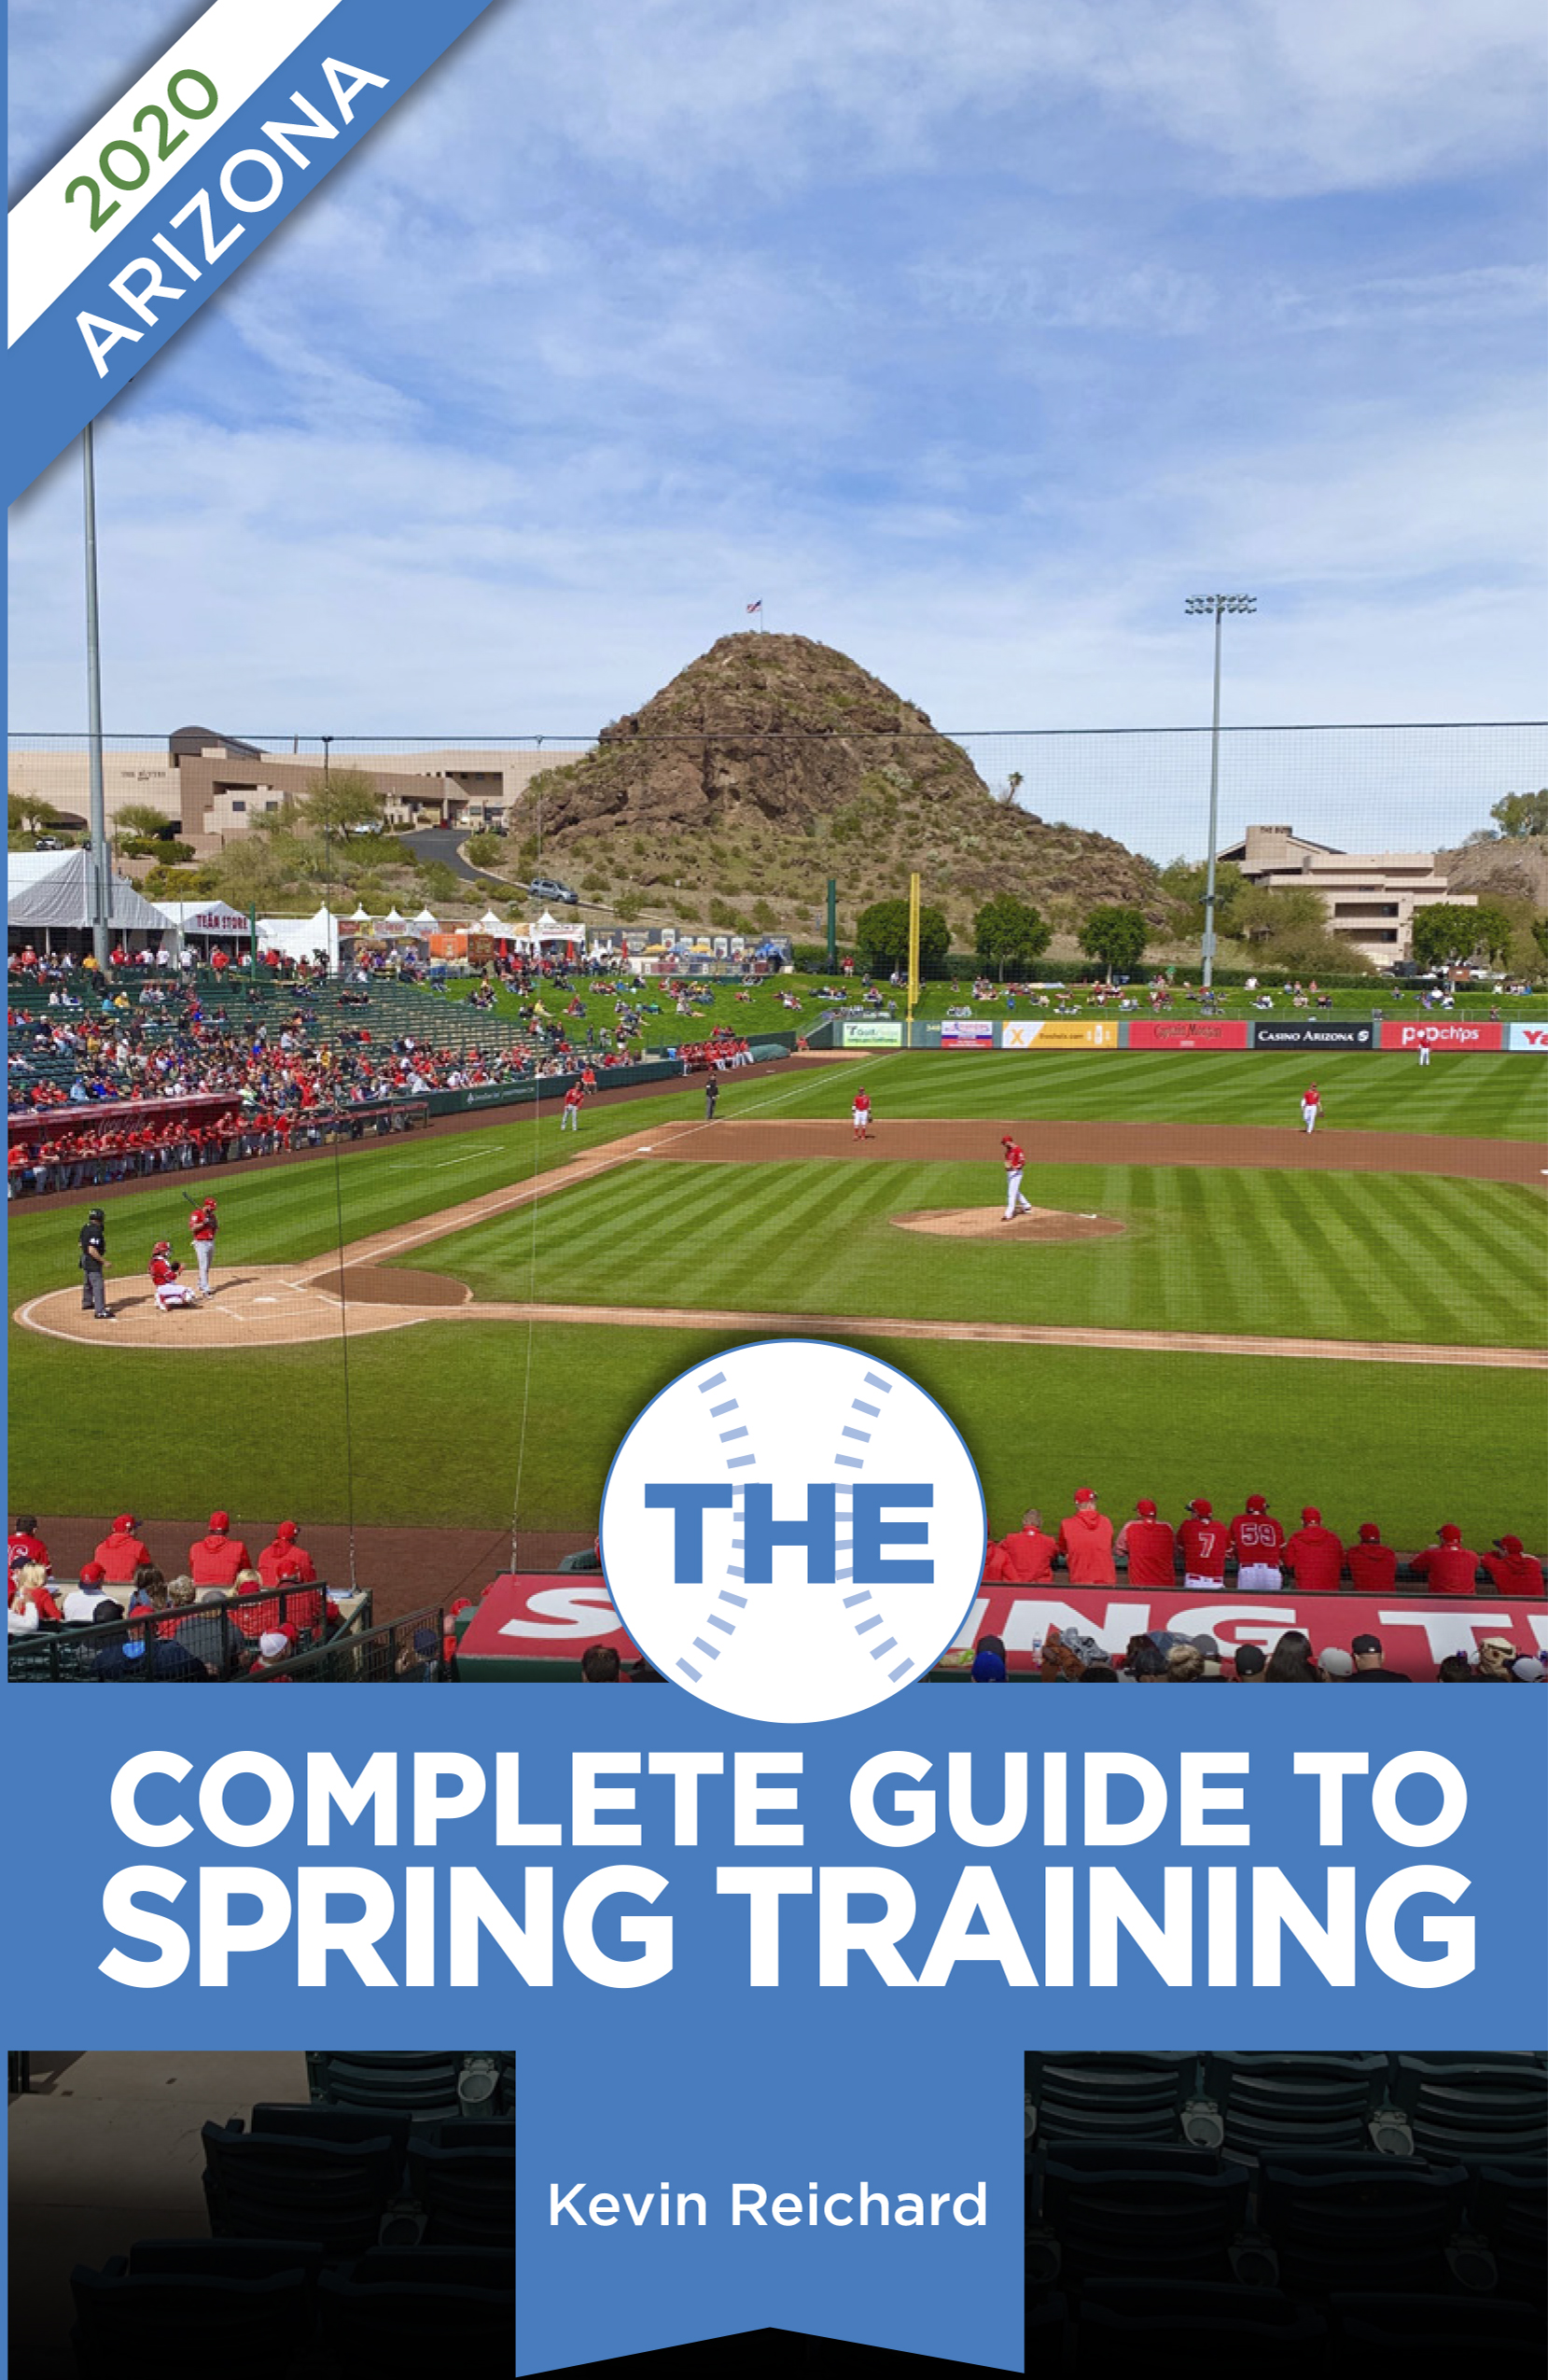 Now Available for Preorder The Complete Guide to Spring Training 2020